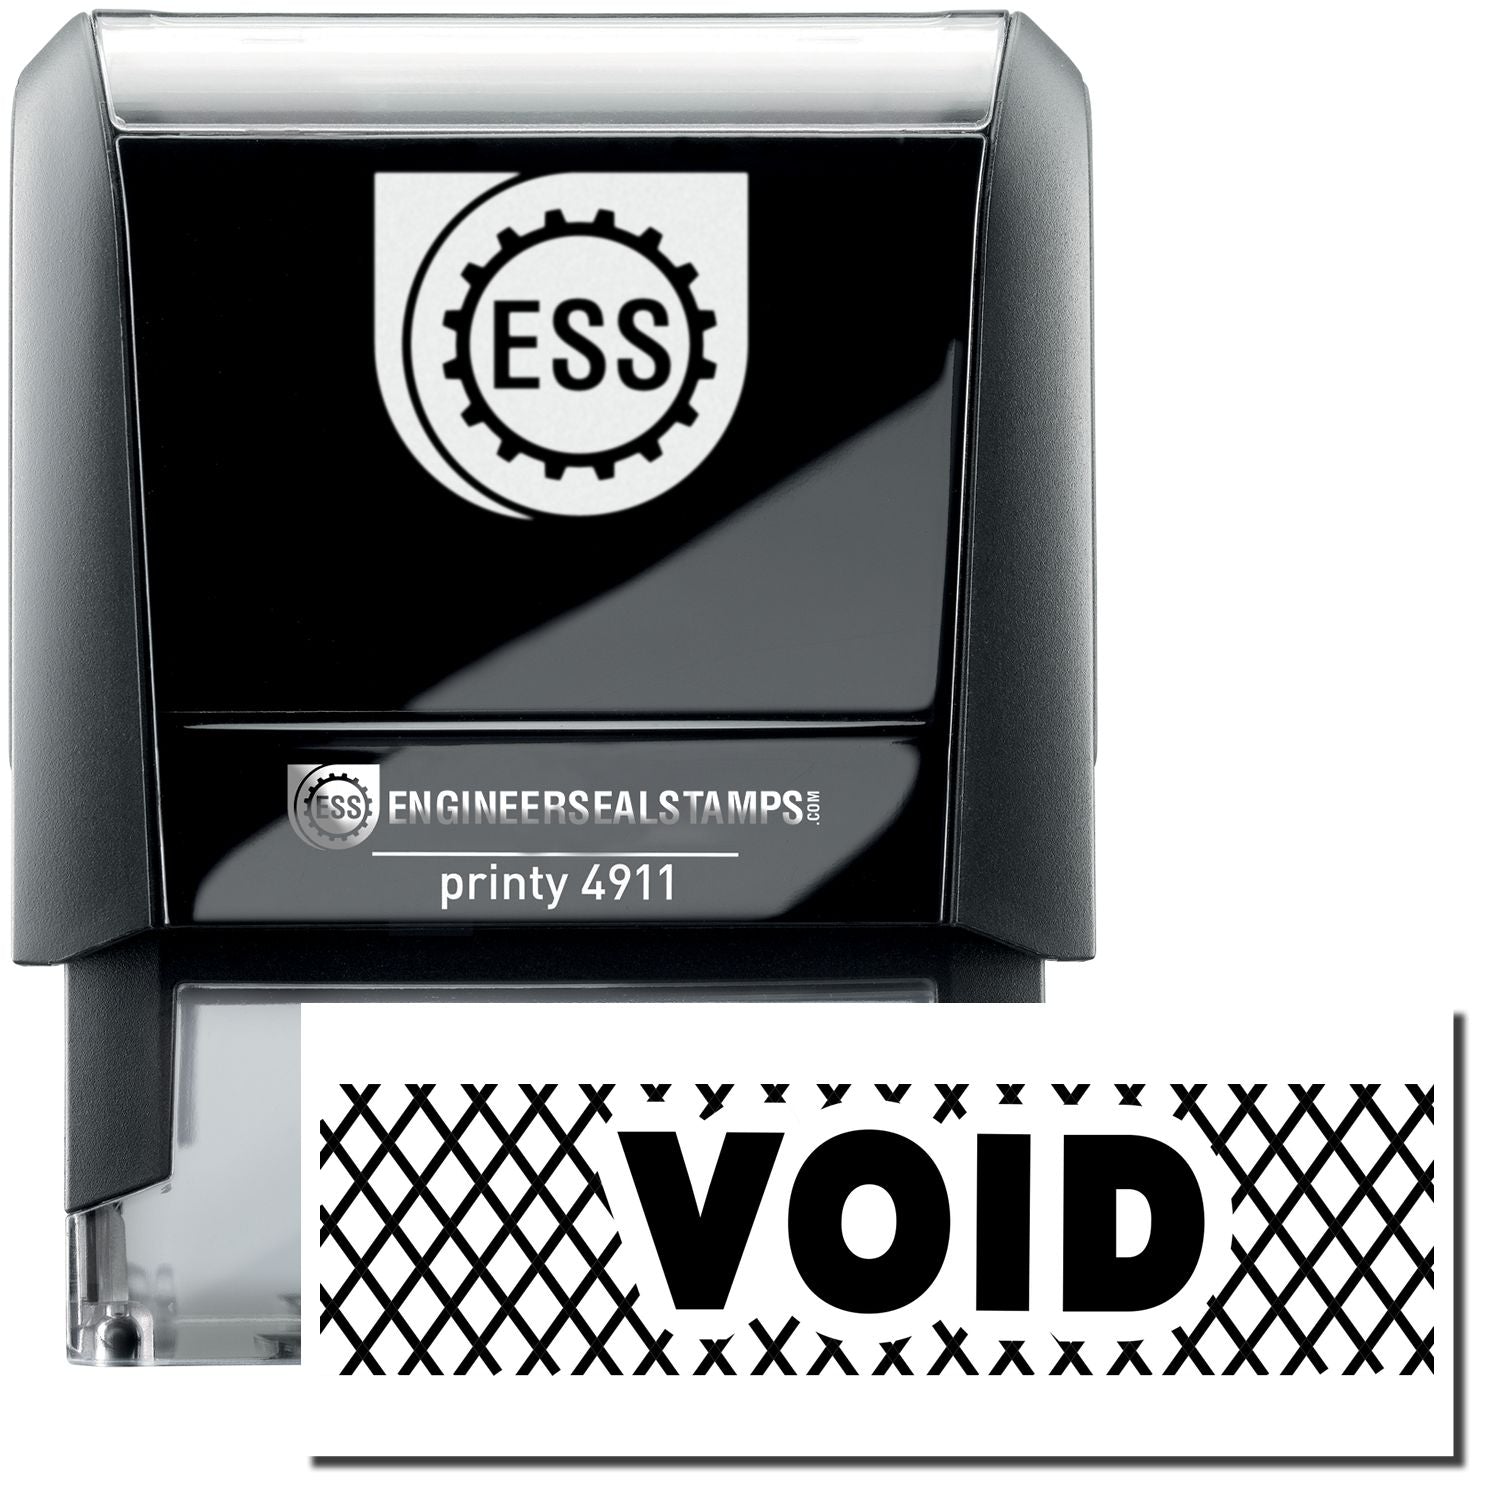 A self-inking stamp with a stamped image showing how the text "VOID" with strikelines around it is displayed after stamping.